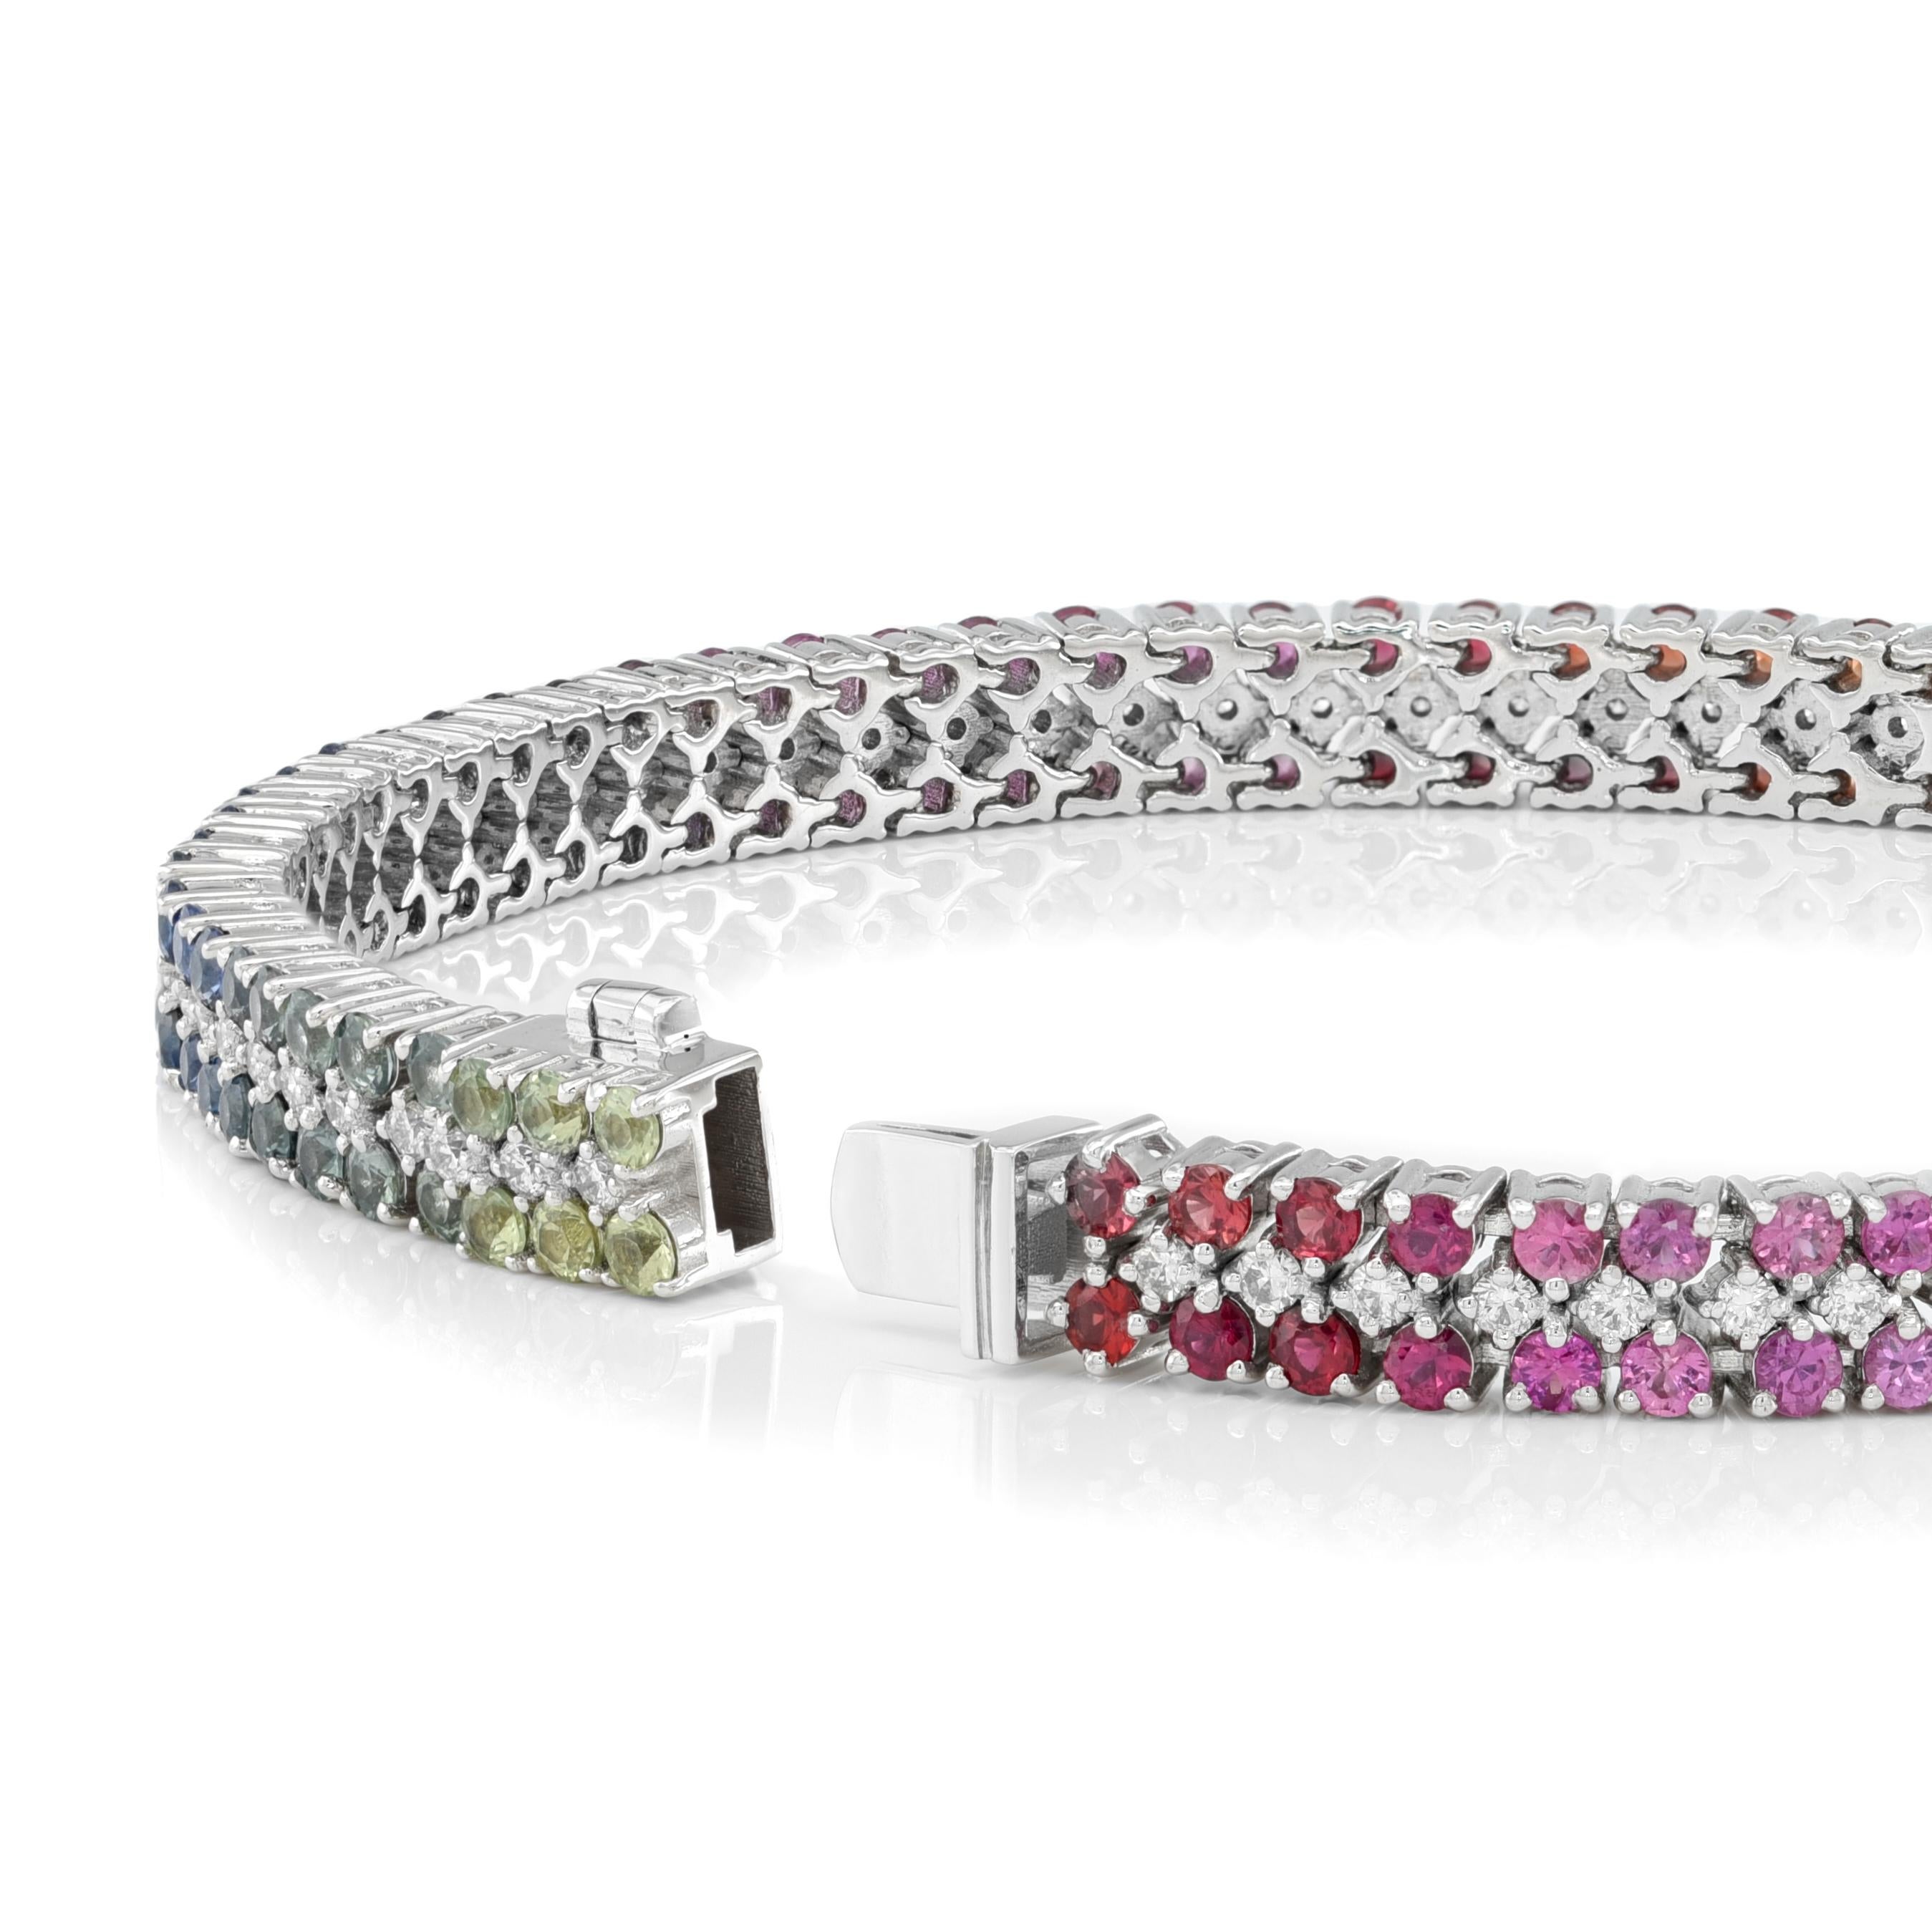 Indulge in the luxurious allure of our exquisite 5.45 carats Natural Rainbow Multi Color Sapphires and 0.86 carats Diamonds, elegantly set within an 18K White Gold Bracelet. Each gem, meticulously cut in Sri Lanka's Brilliant style, radiates a